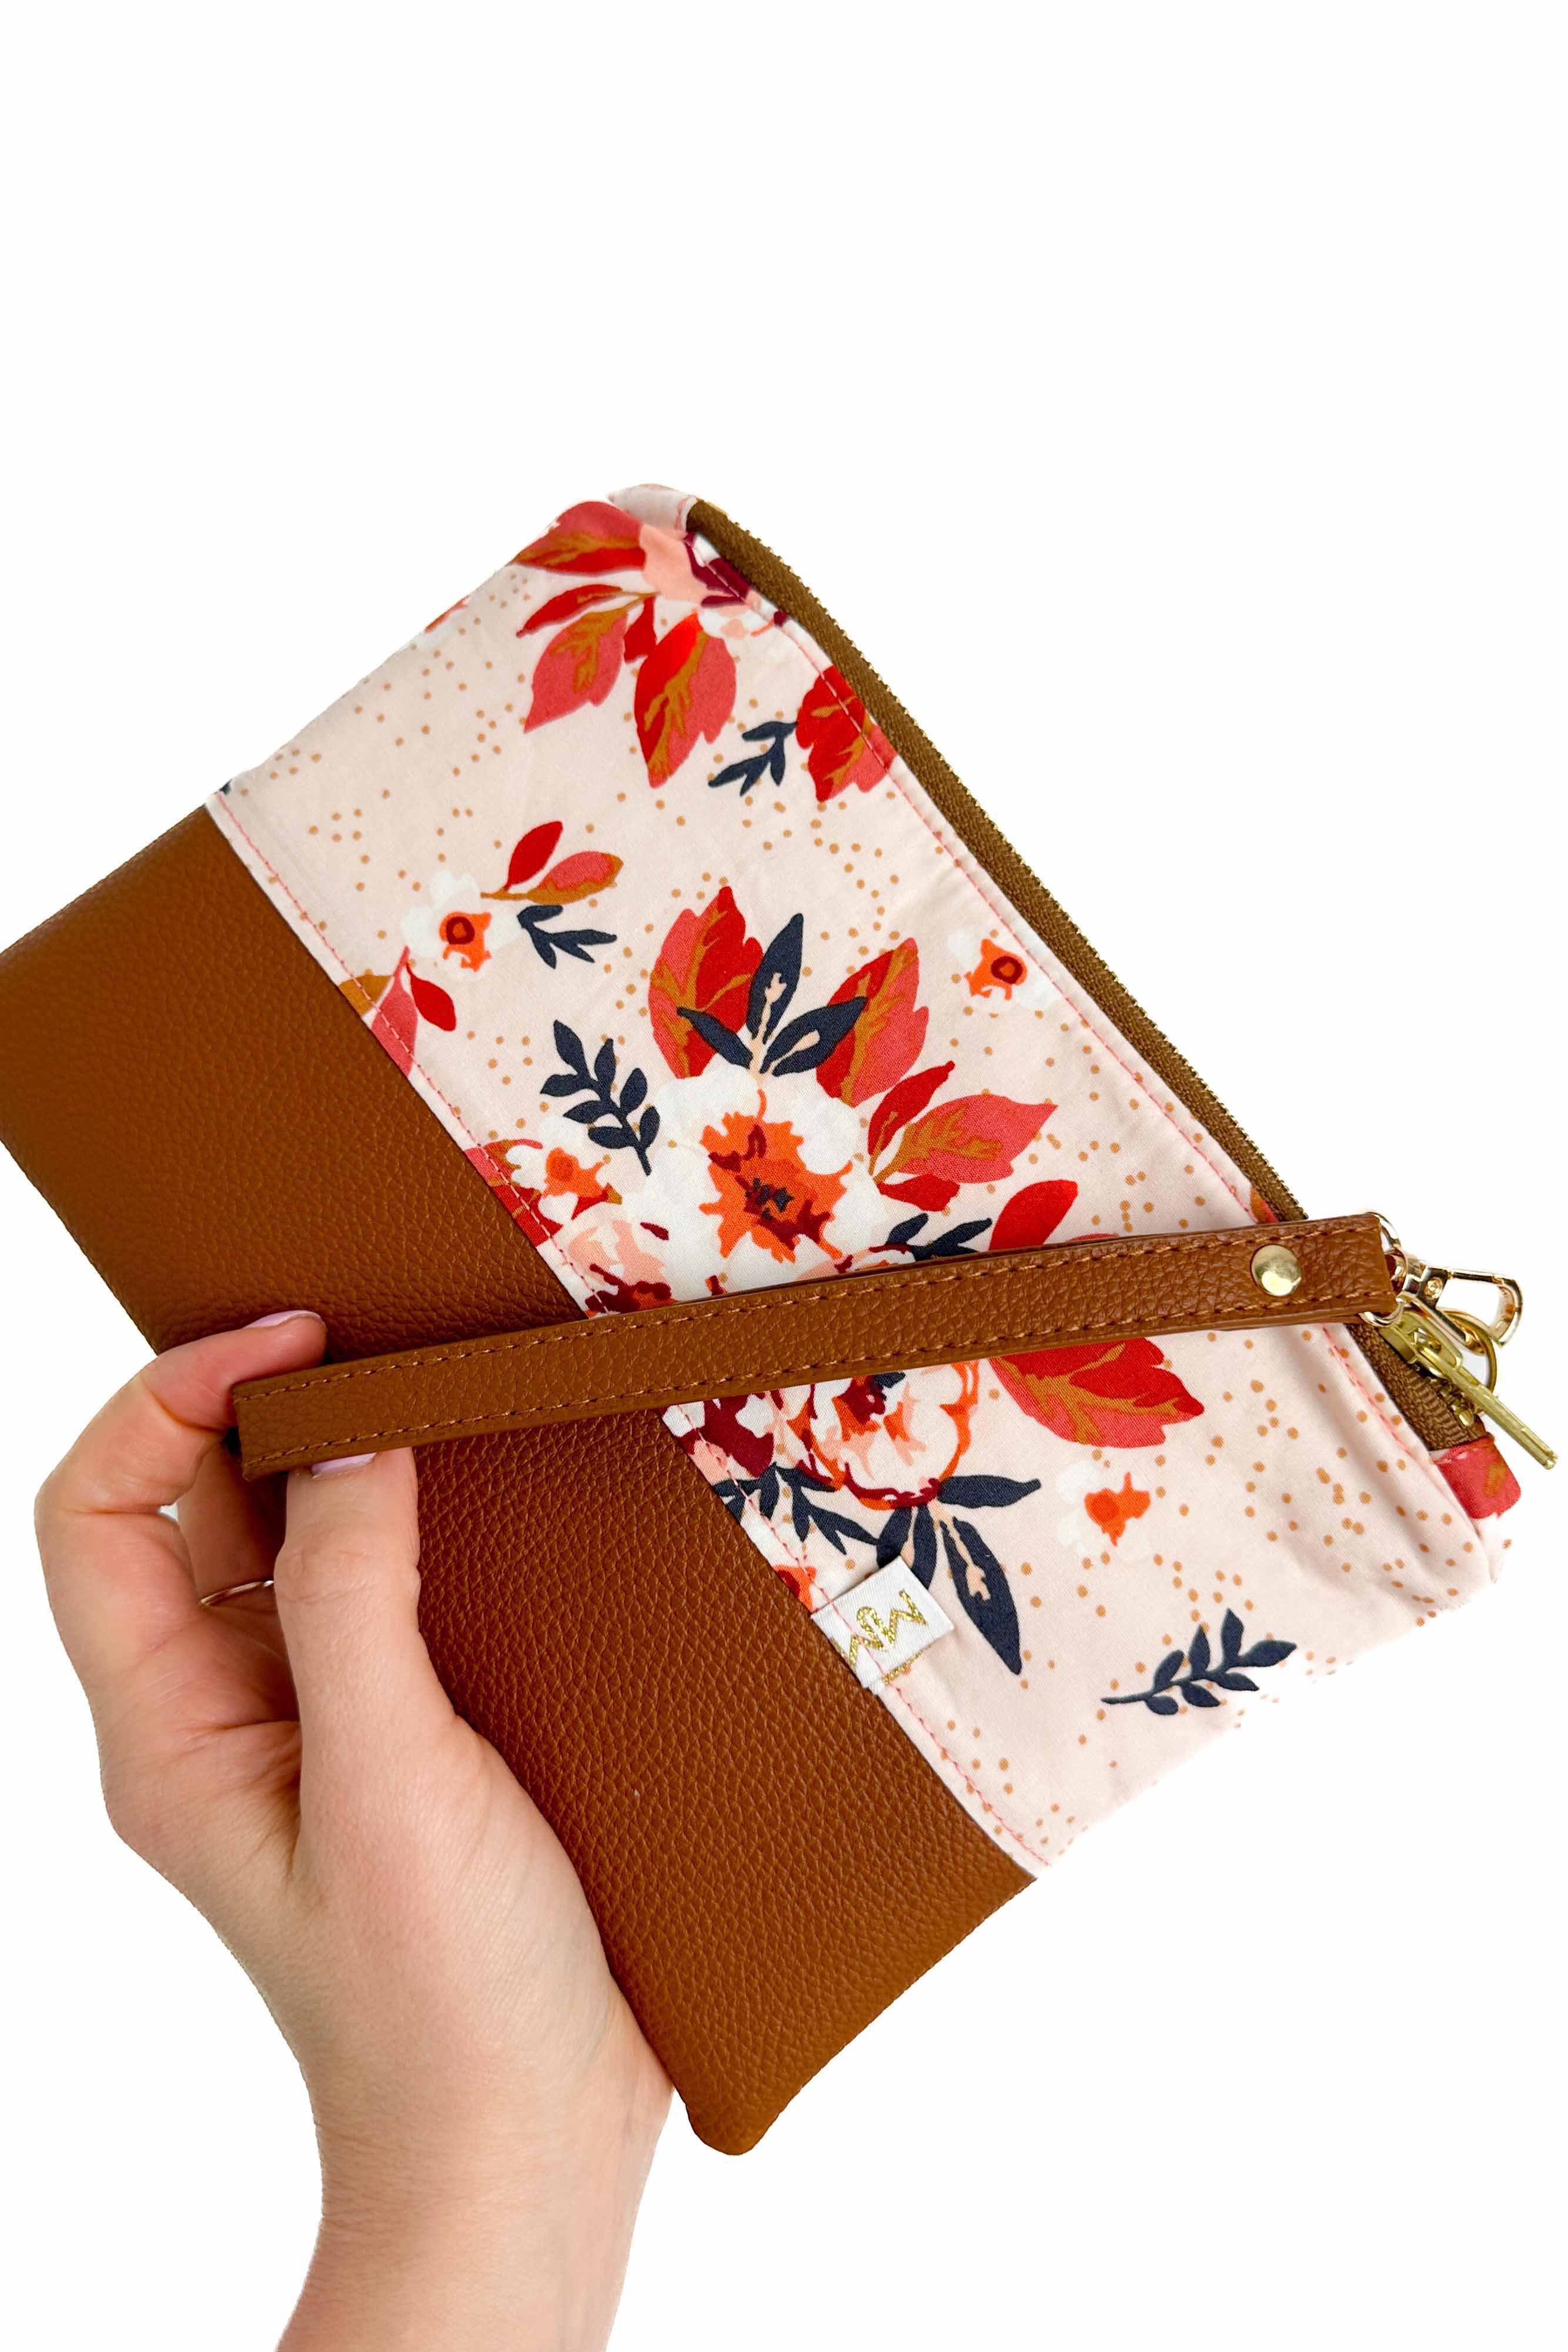 Smitten Convertible Crossbody Wristlet+ with Compartments READY TO SHIP - Modern Makerie